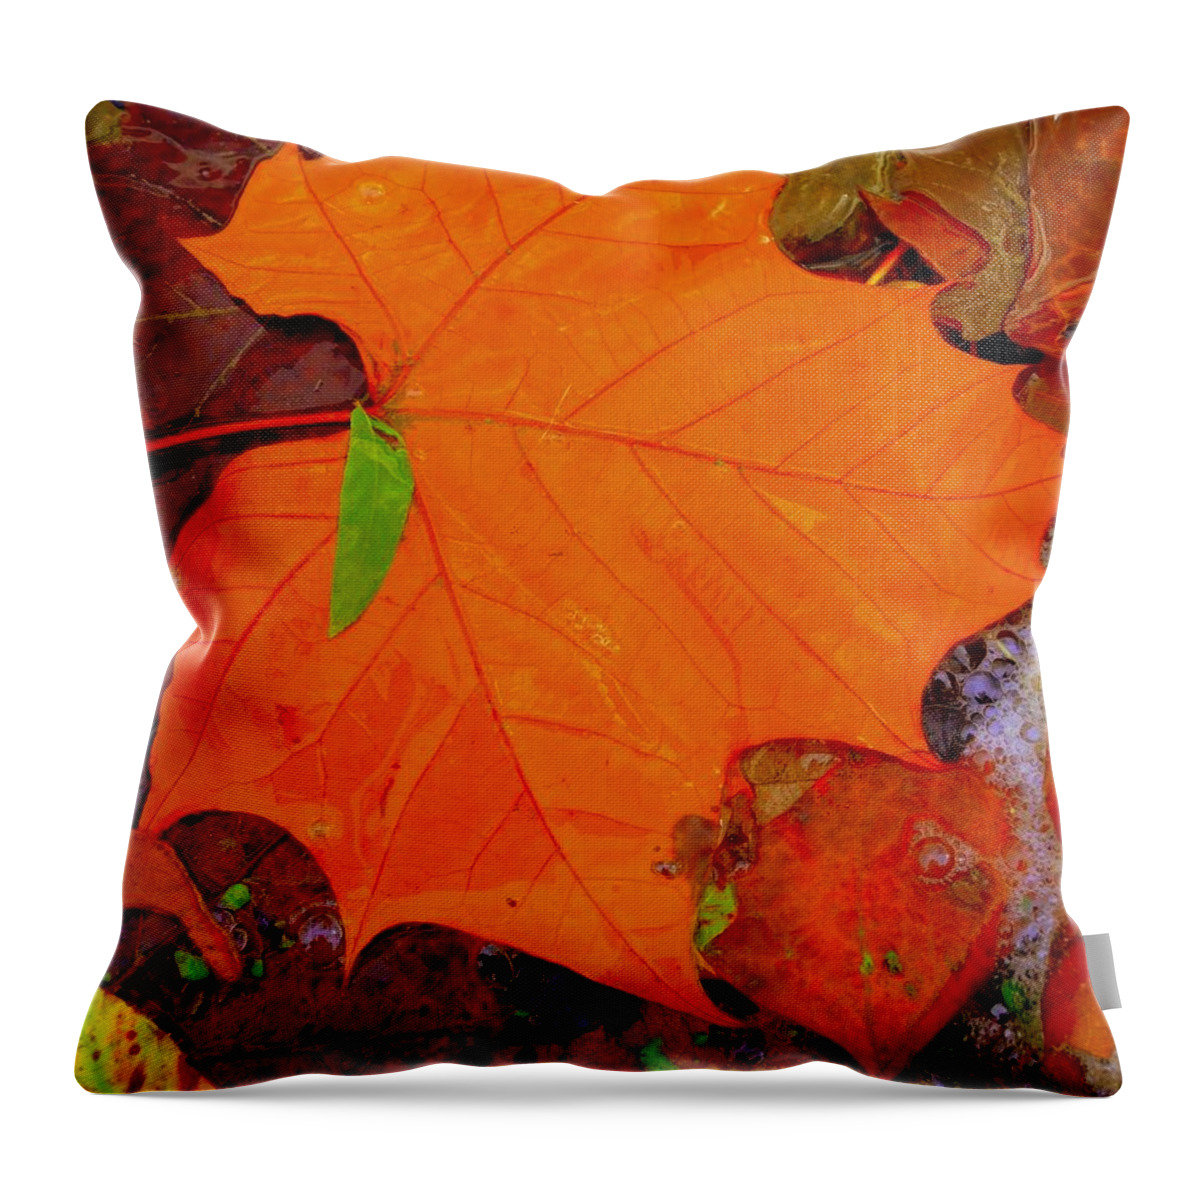 Green Thumb Throw Pillow featuring the photograph Green Thumb by Edward Smith